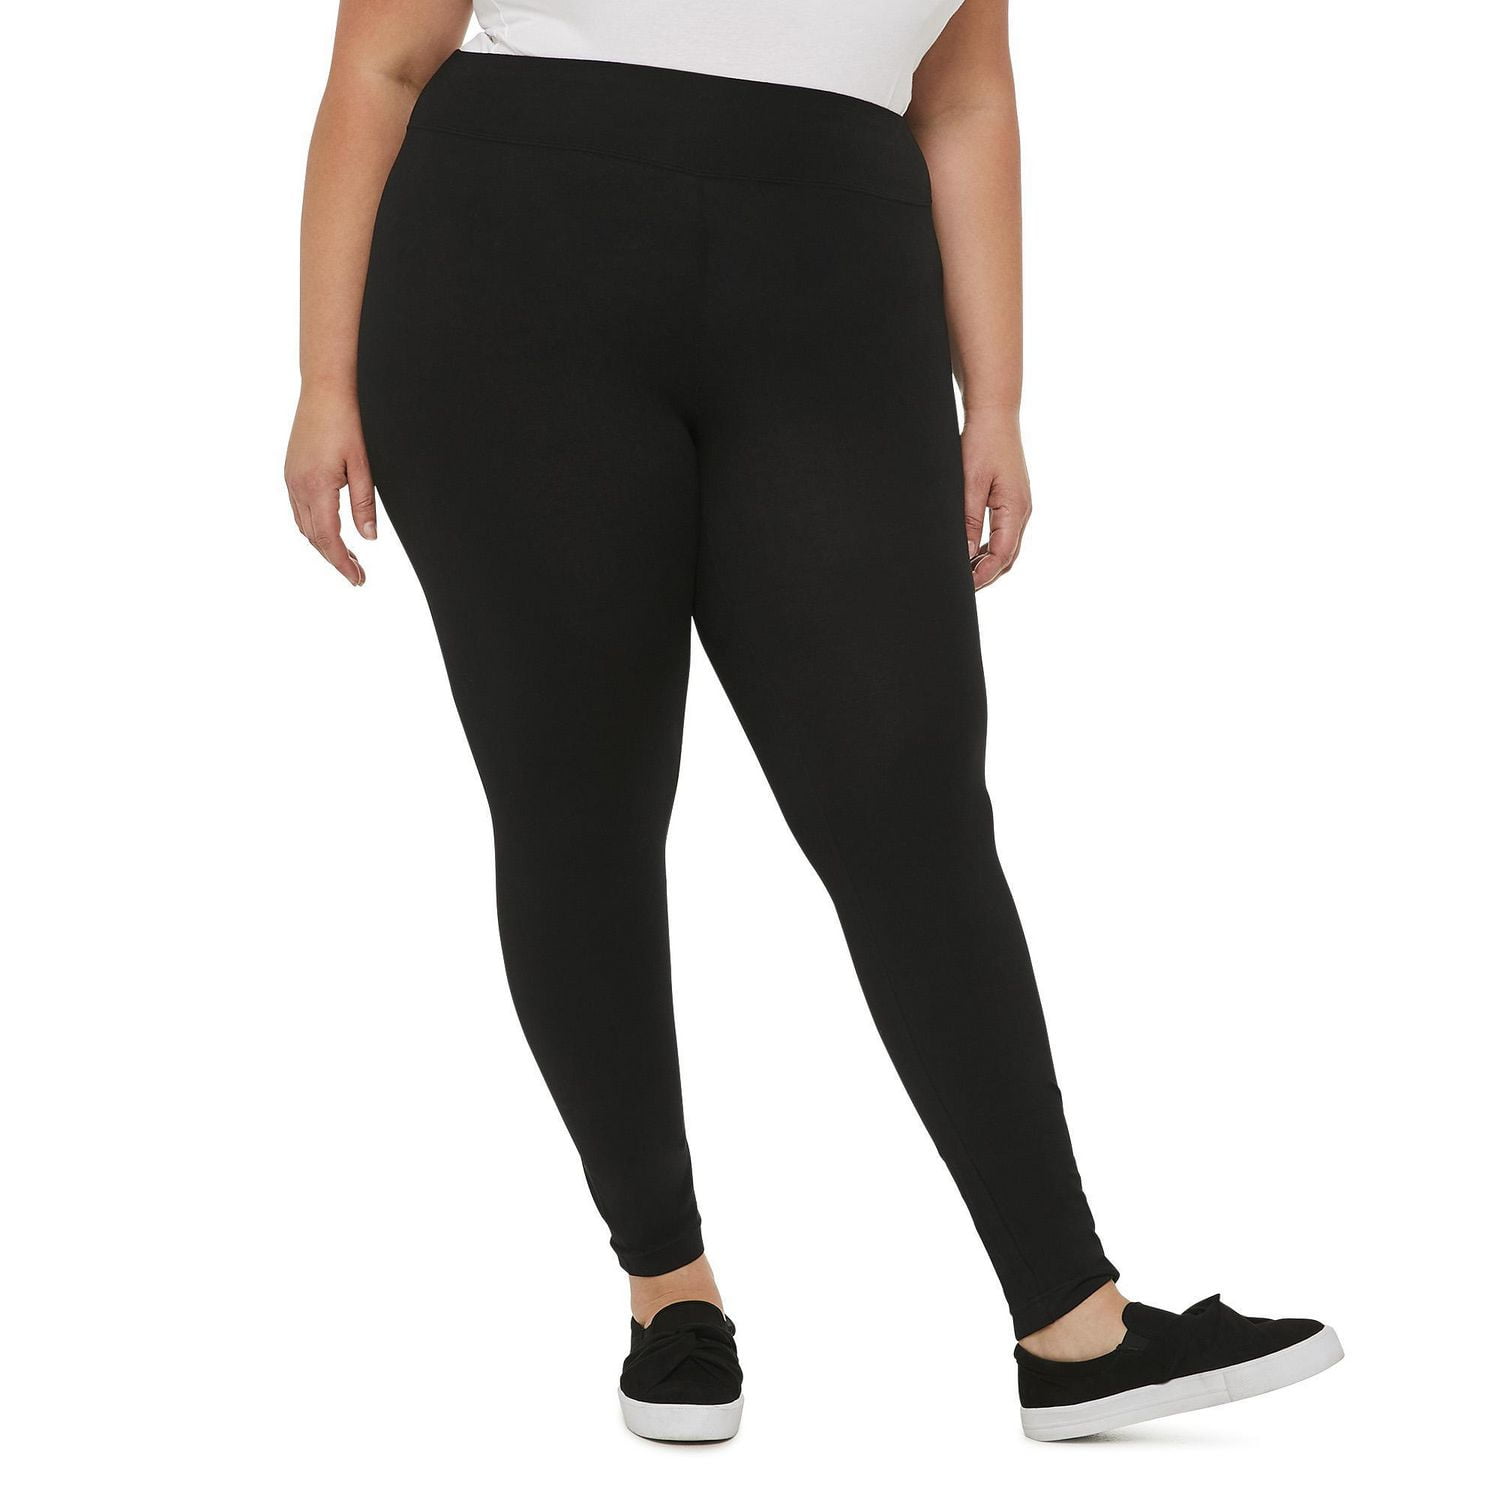 George Plus Women's Basic Fitted Legging, Sizes 1X-4X 